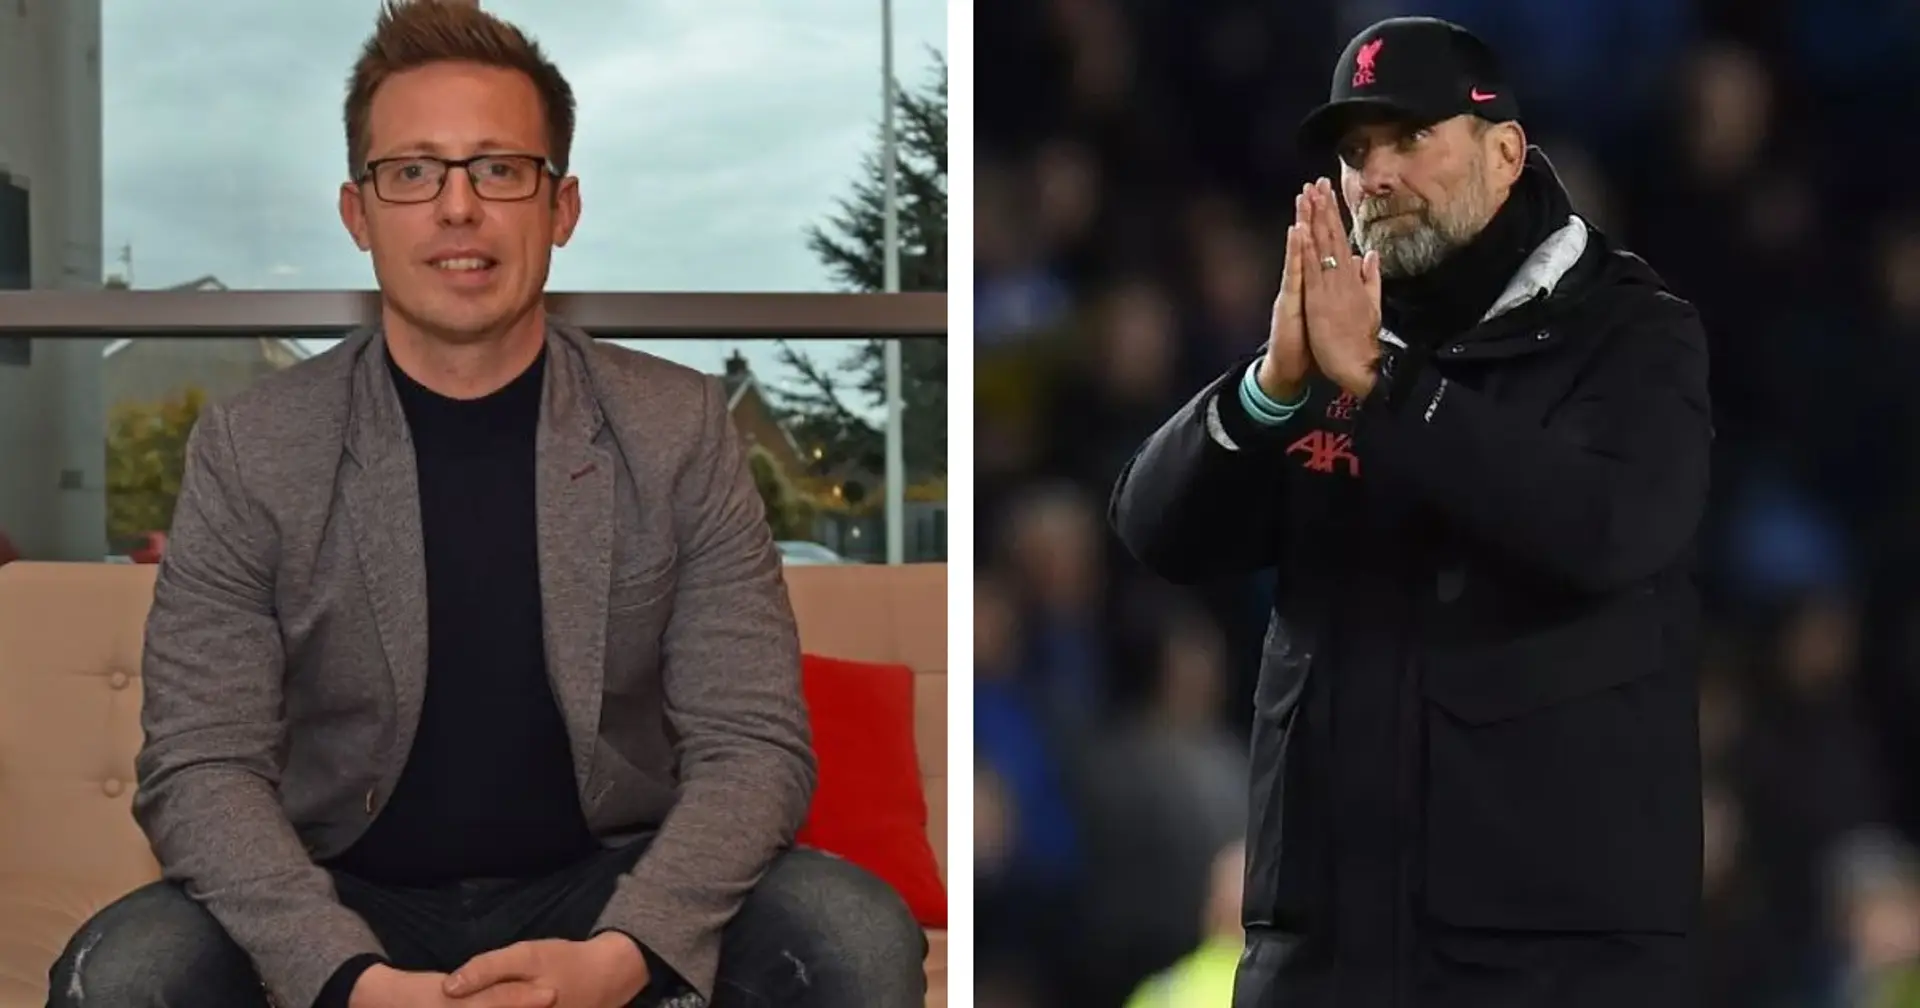 Michael Edwards wants complete control of football operations to consider Liverpool return (reliability: 5 stars)